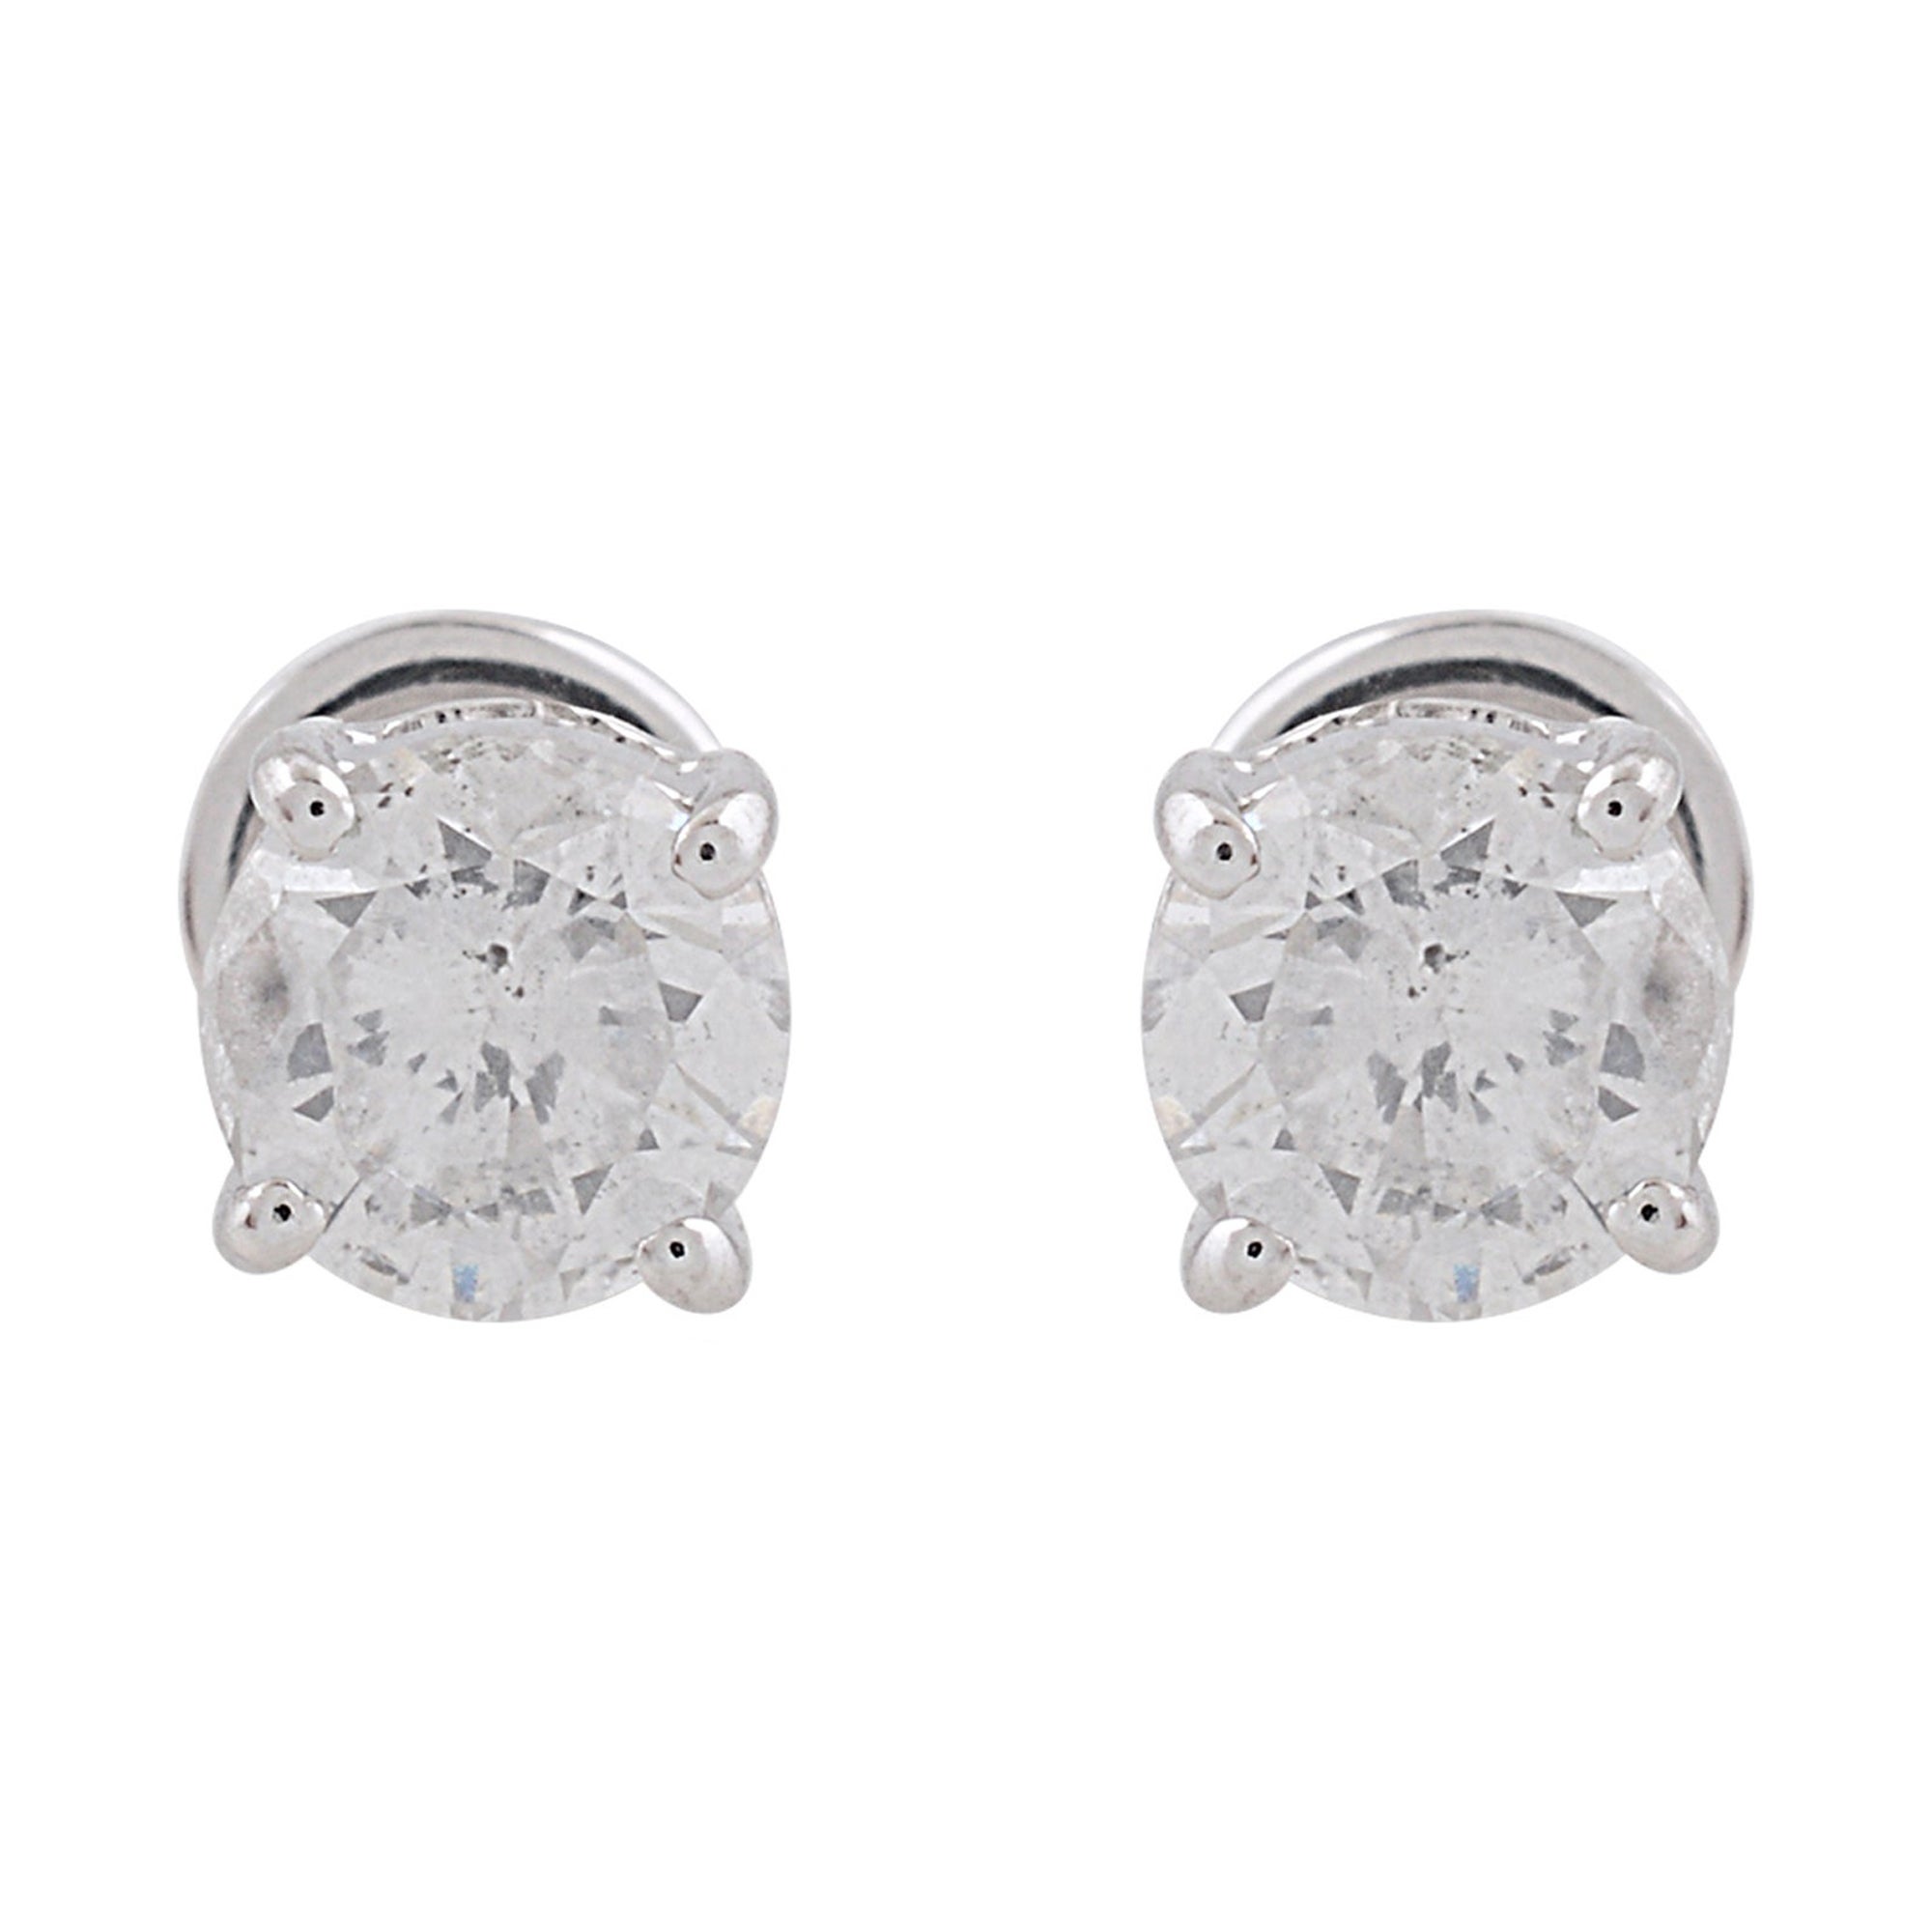 SI Clarity HI Color Solitaire Diamond Minimalist Stud Earrings 10k White Gold